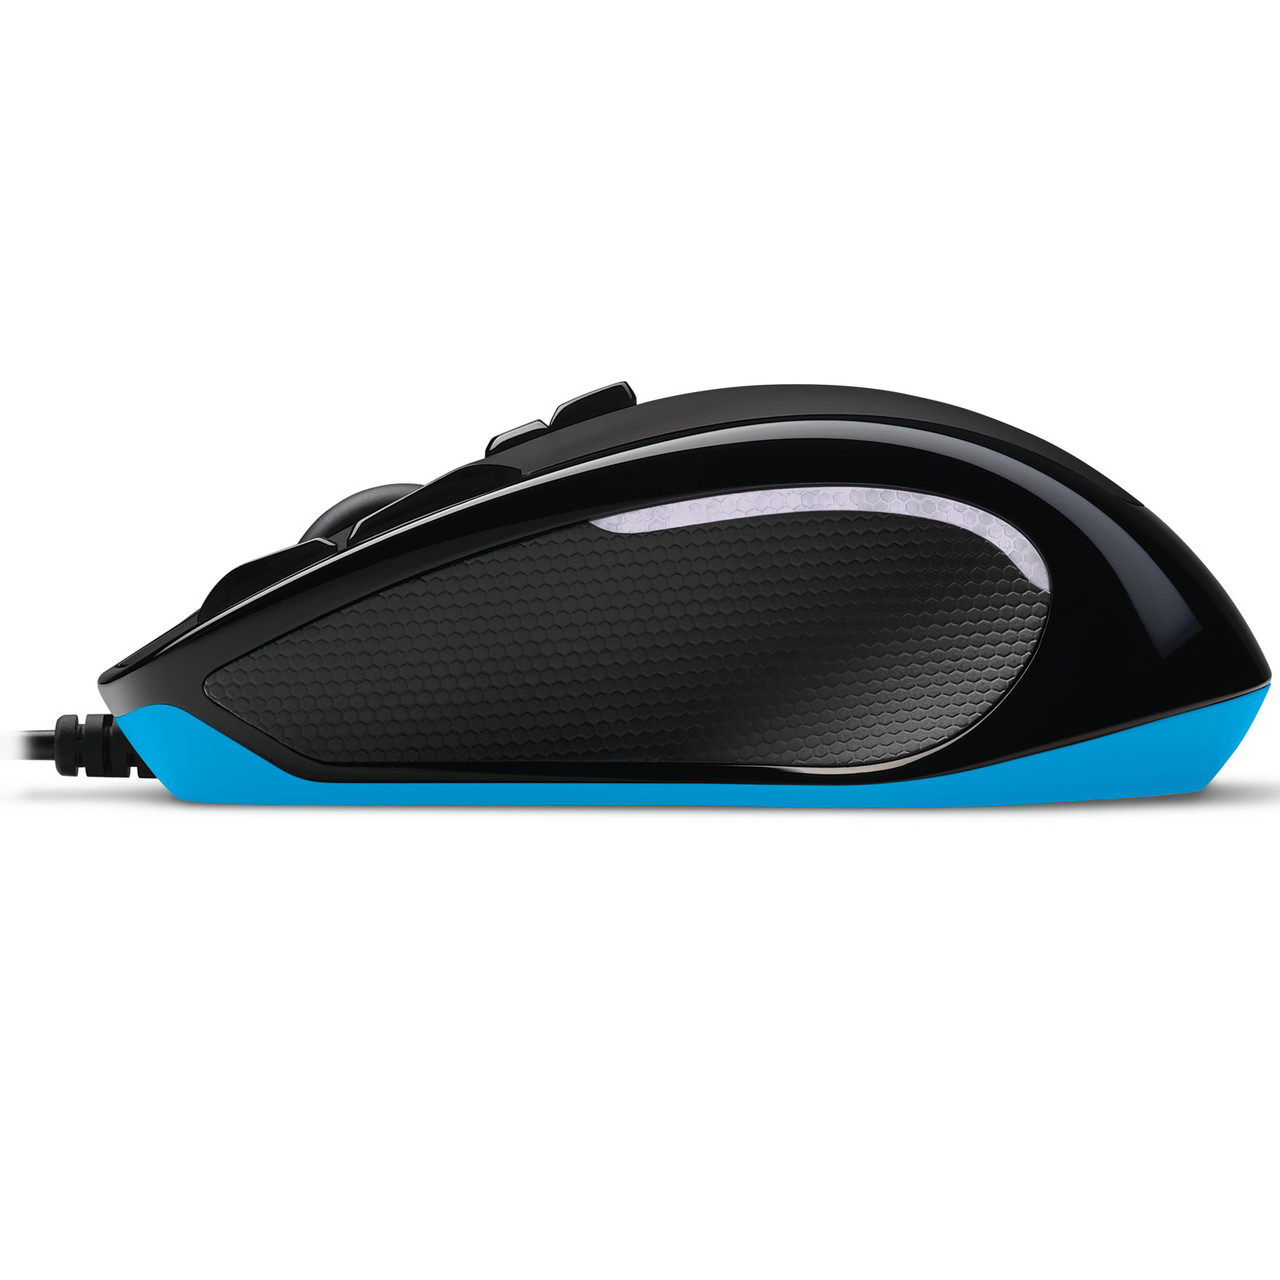 Mouse Logitech G300s Gaming Optical